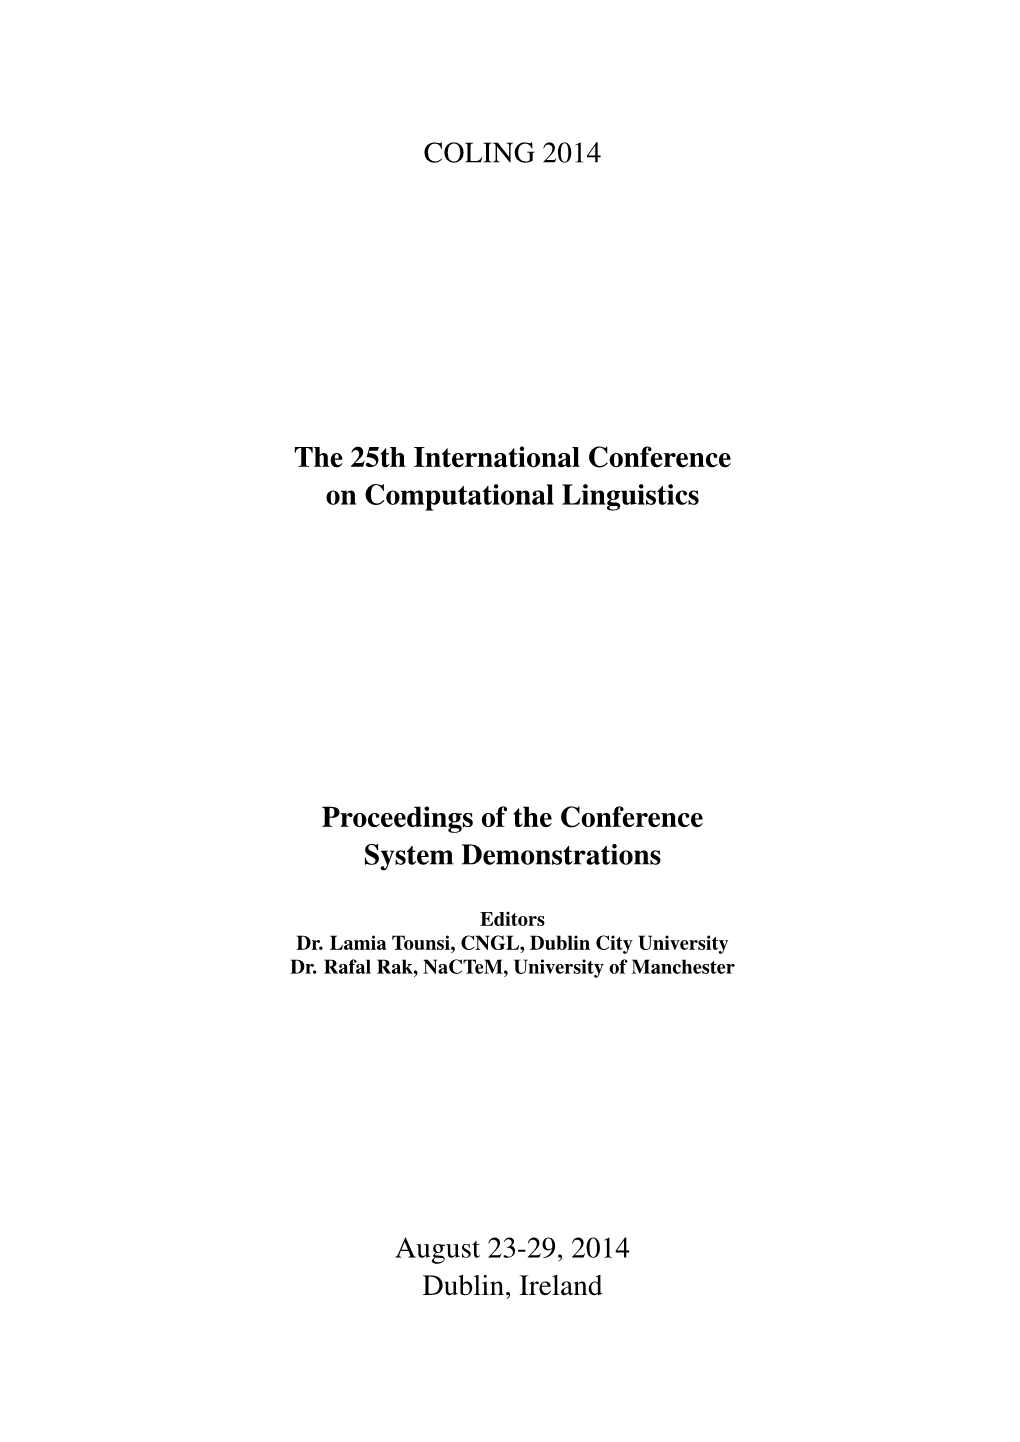 Proceedings of the 25Th International Conference on Computational Linguistics (COLING))